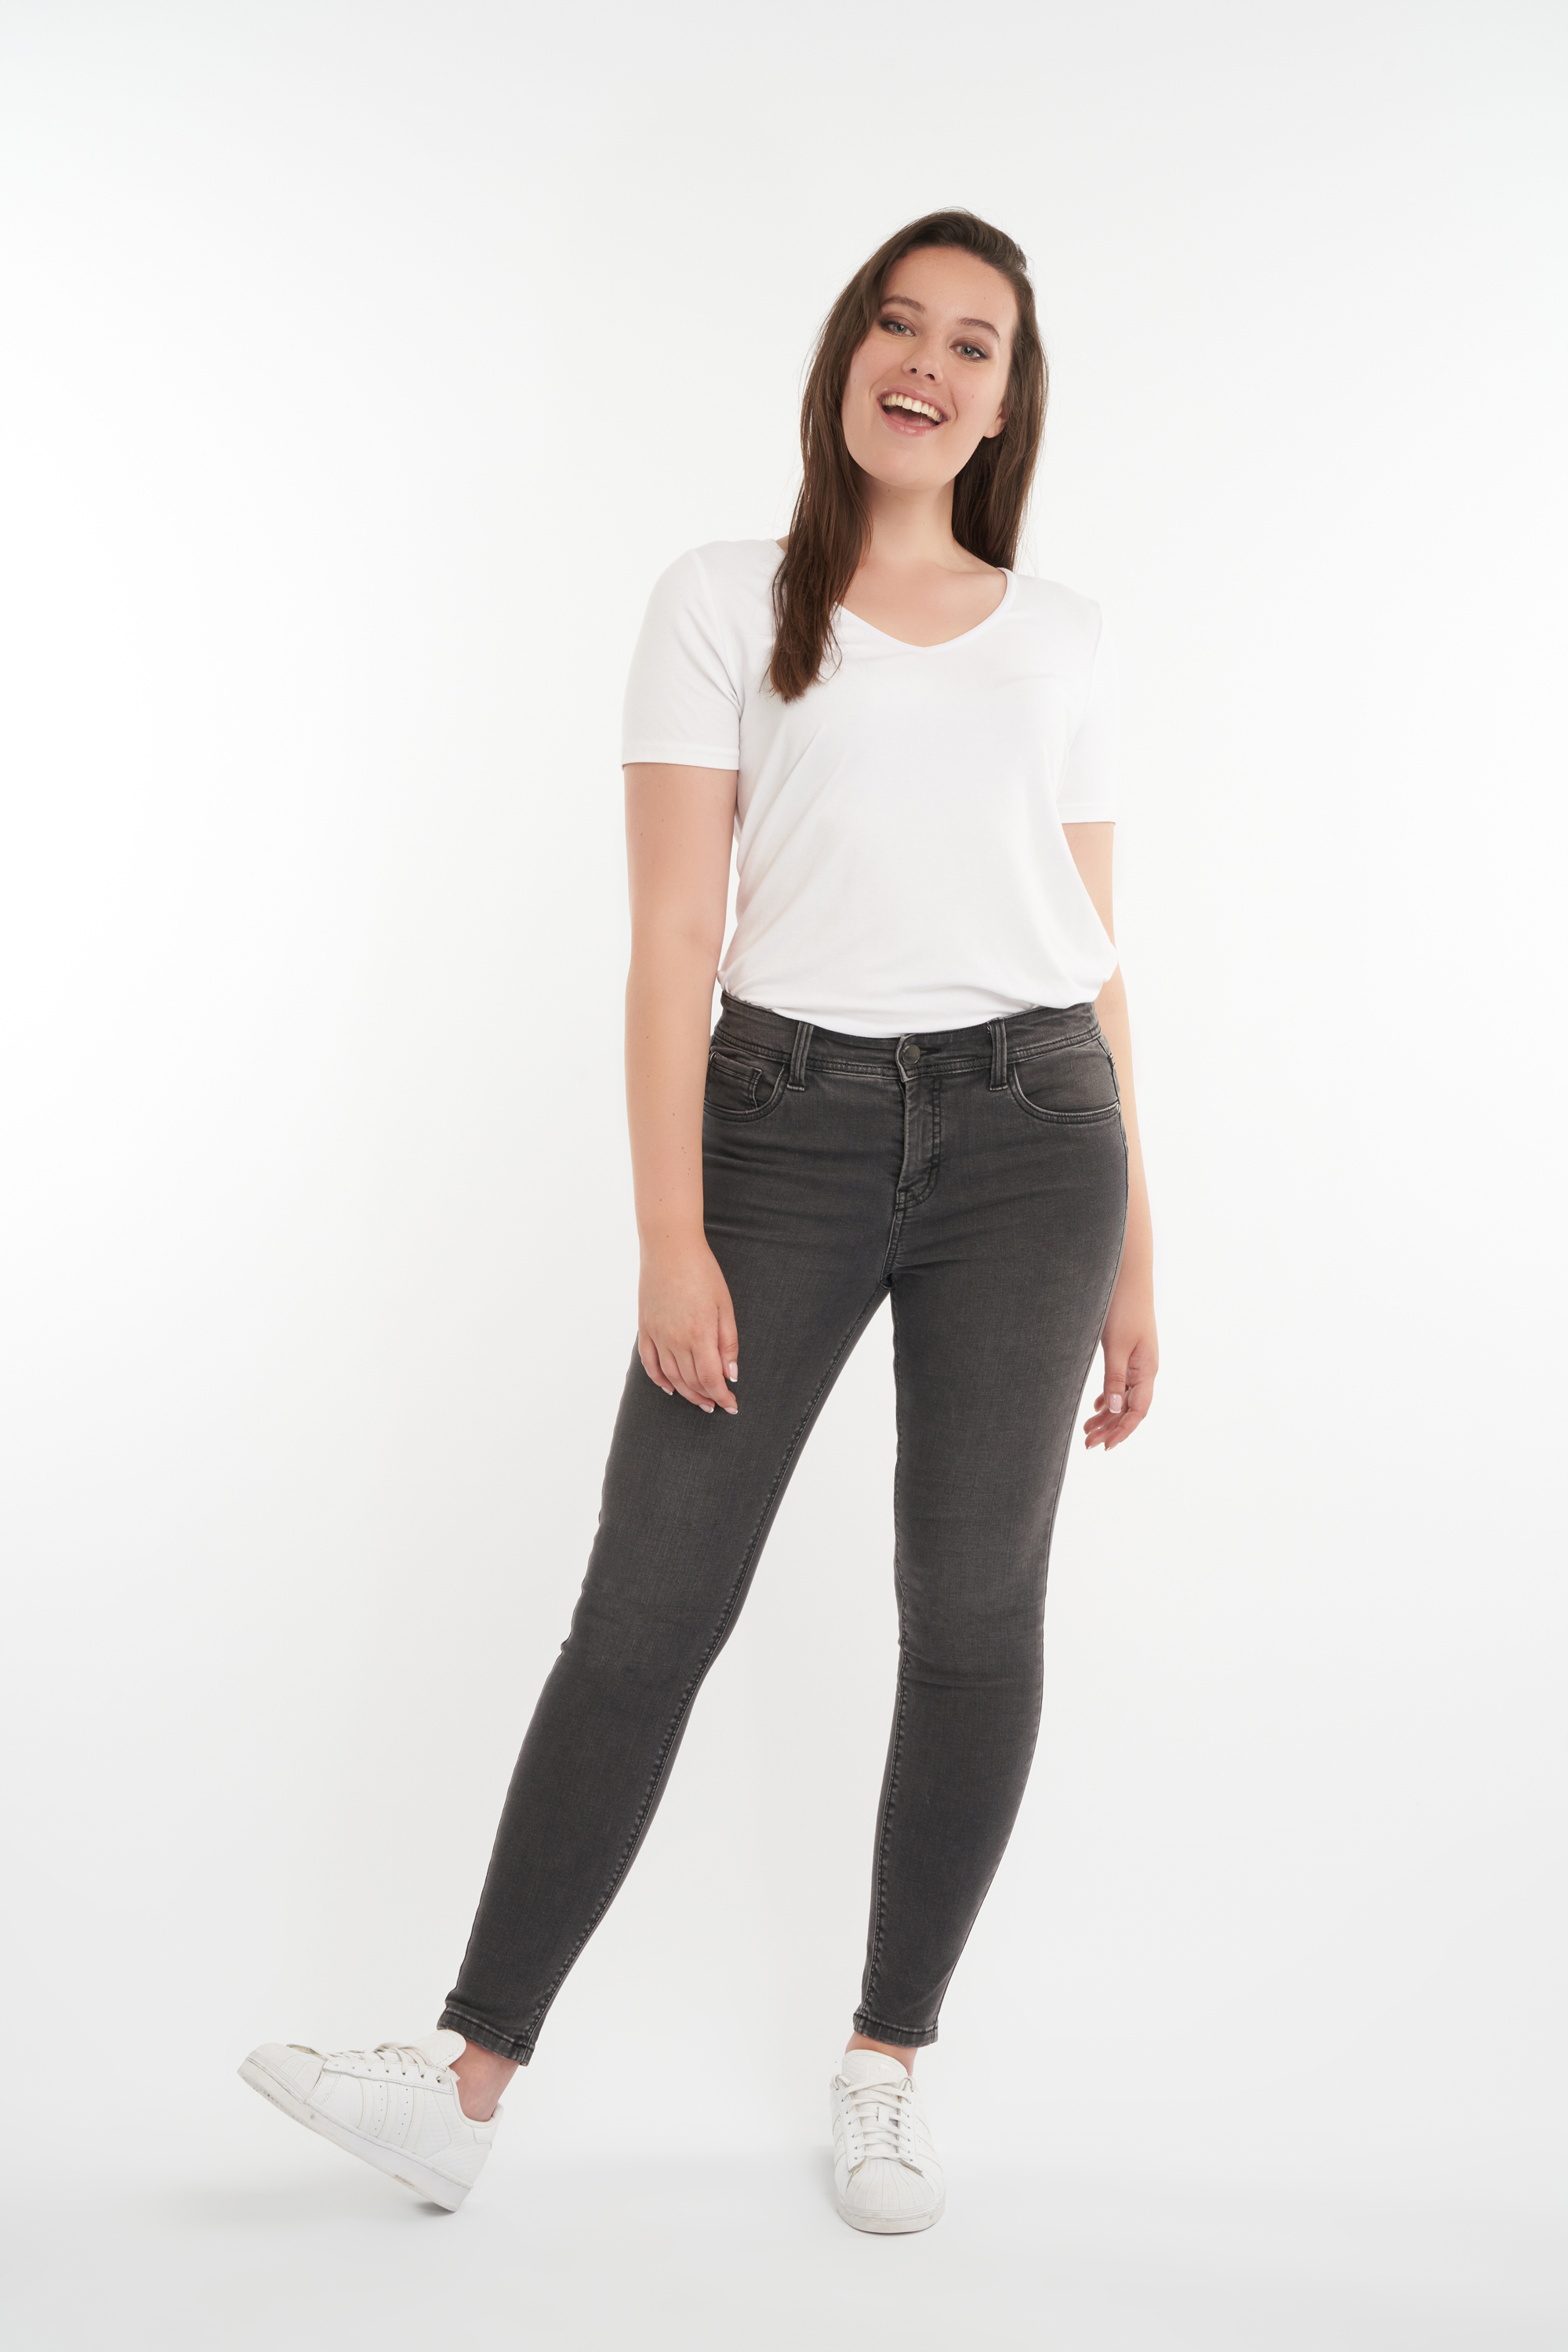 Magic Simplicity SHAPES Jeans image number null